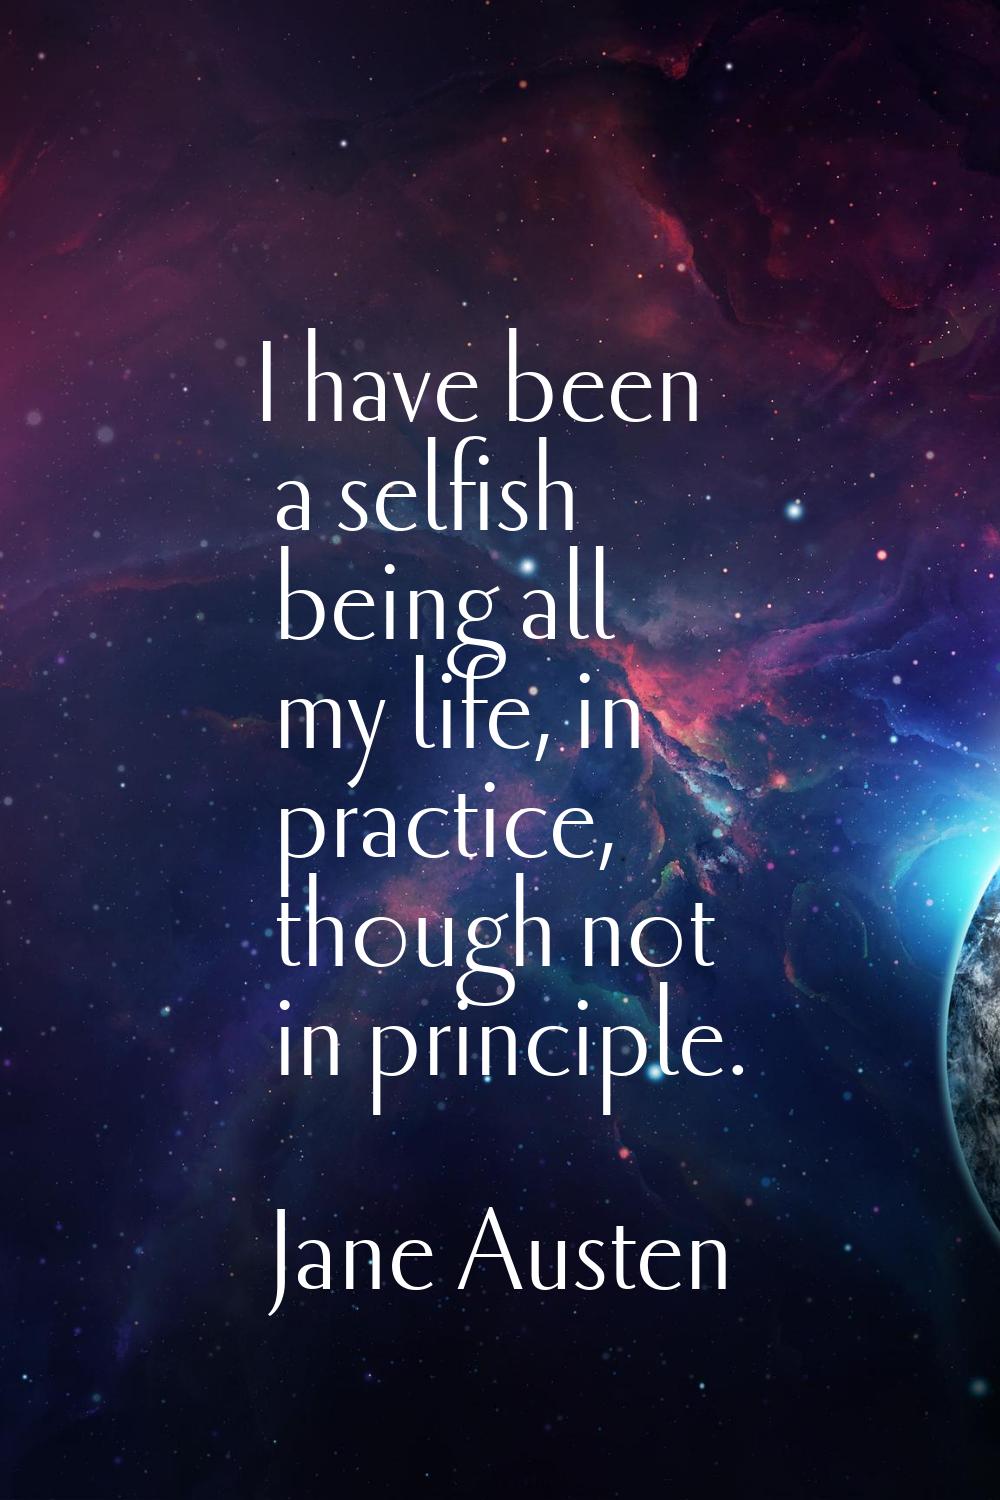 I have been a selfish being all my life, in practice, though not in principle.